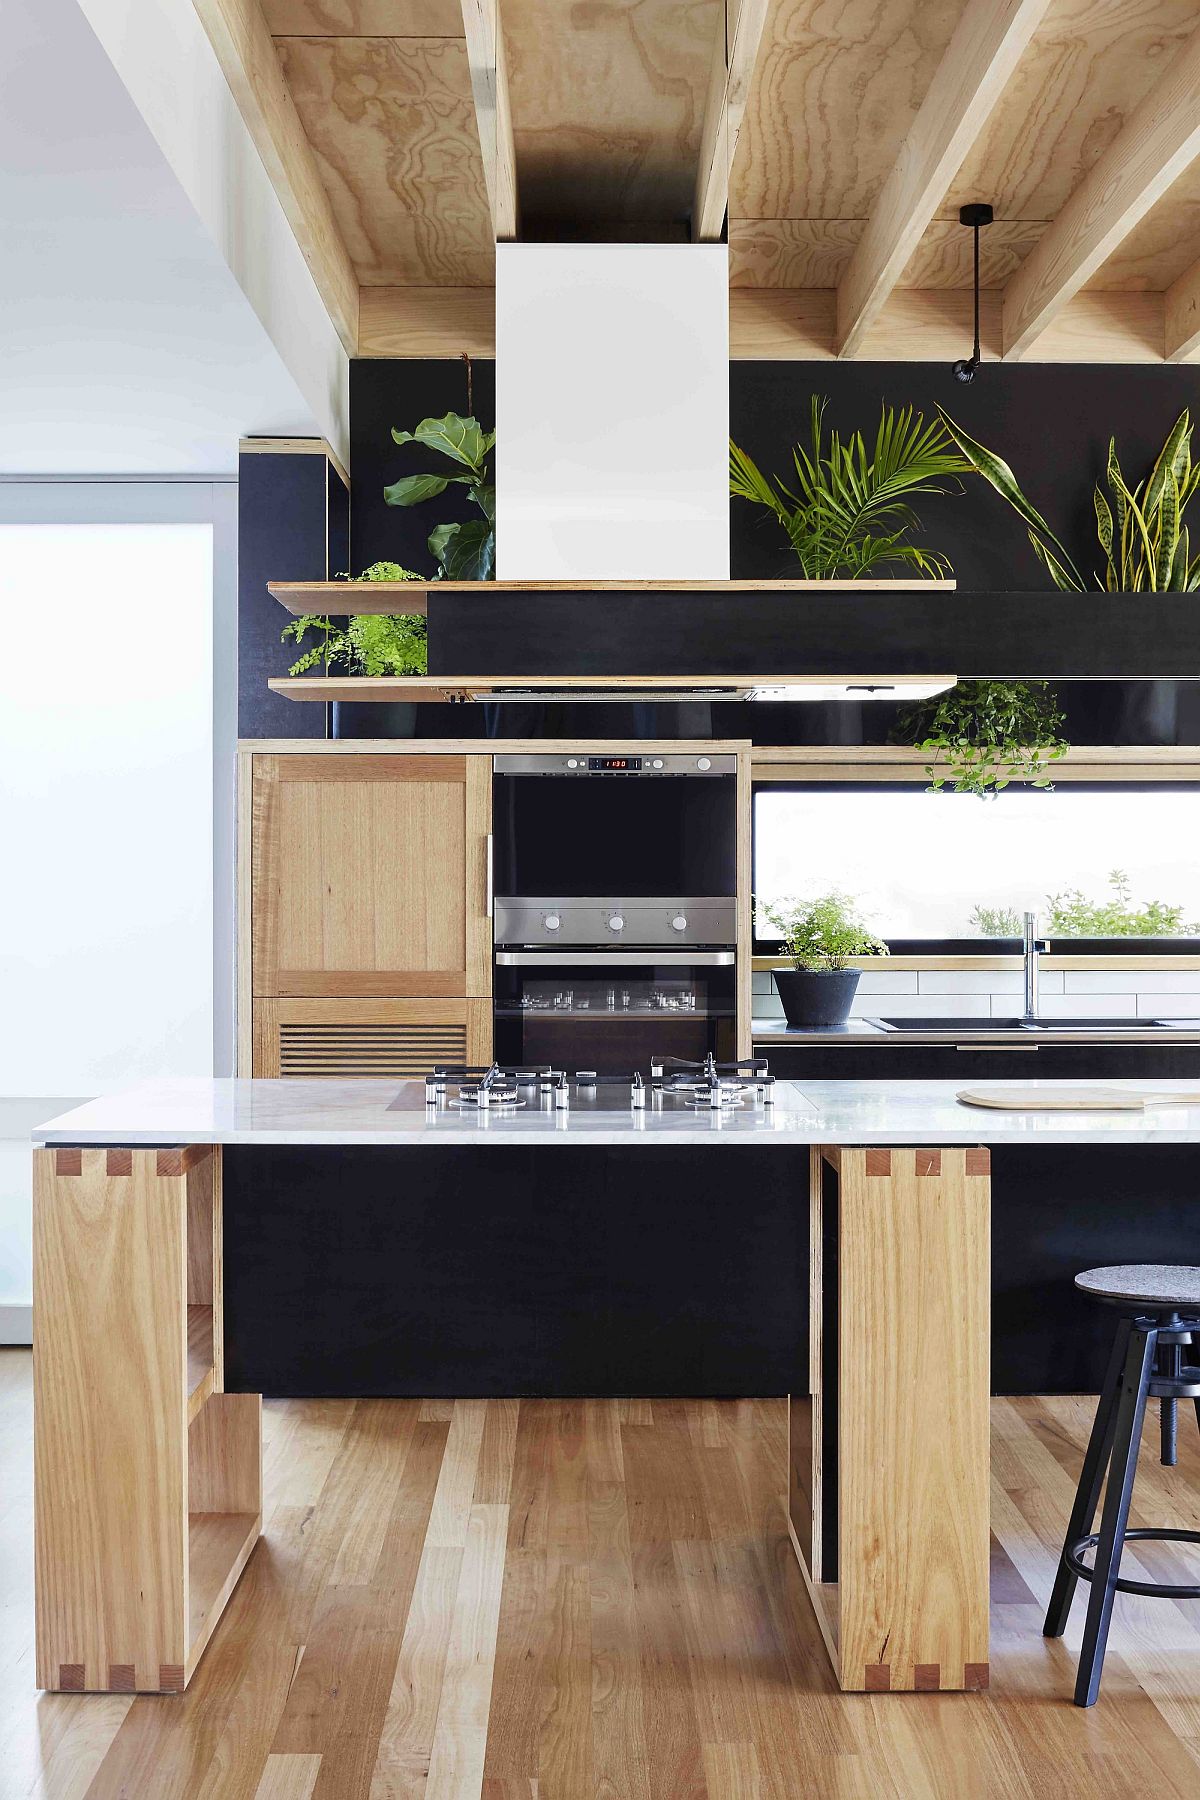 Wooden-kitchen-island-design-is-light-and-breezy